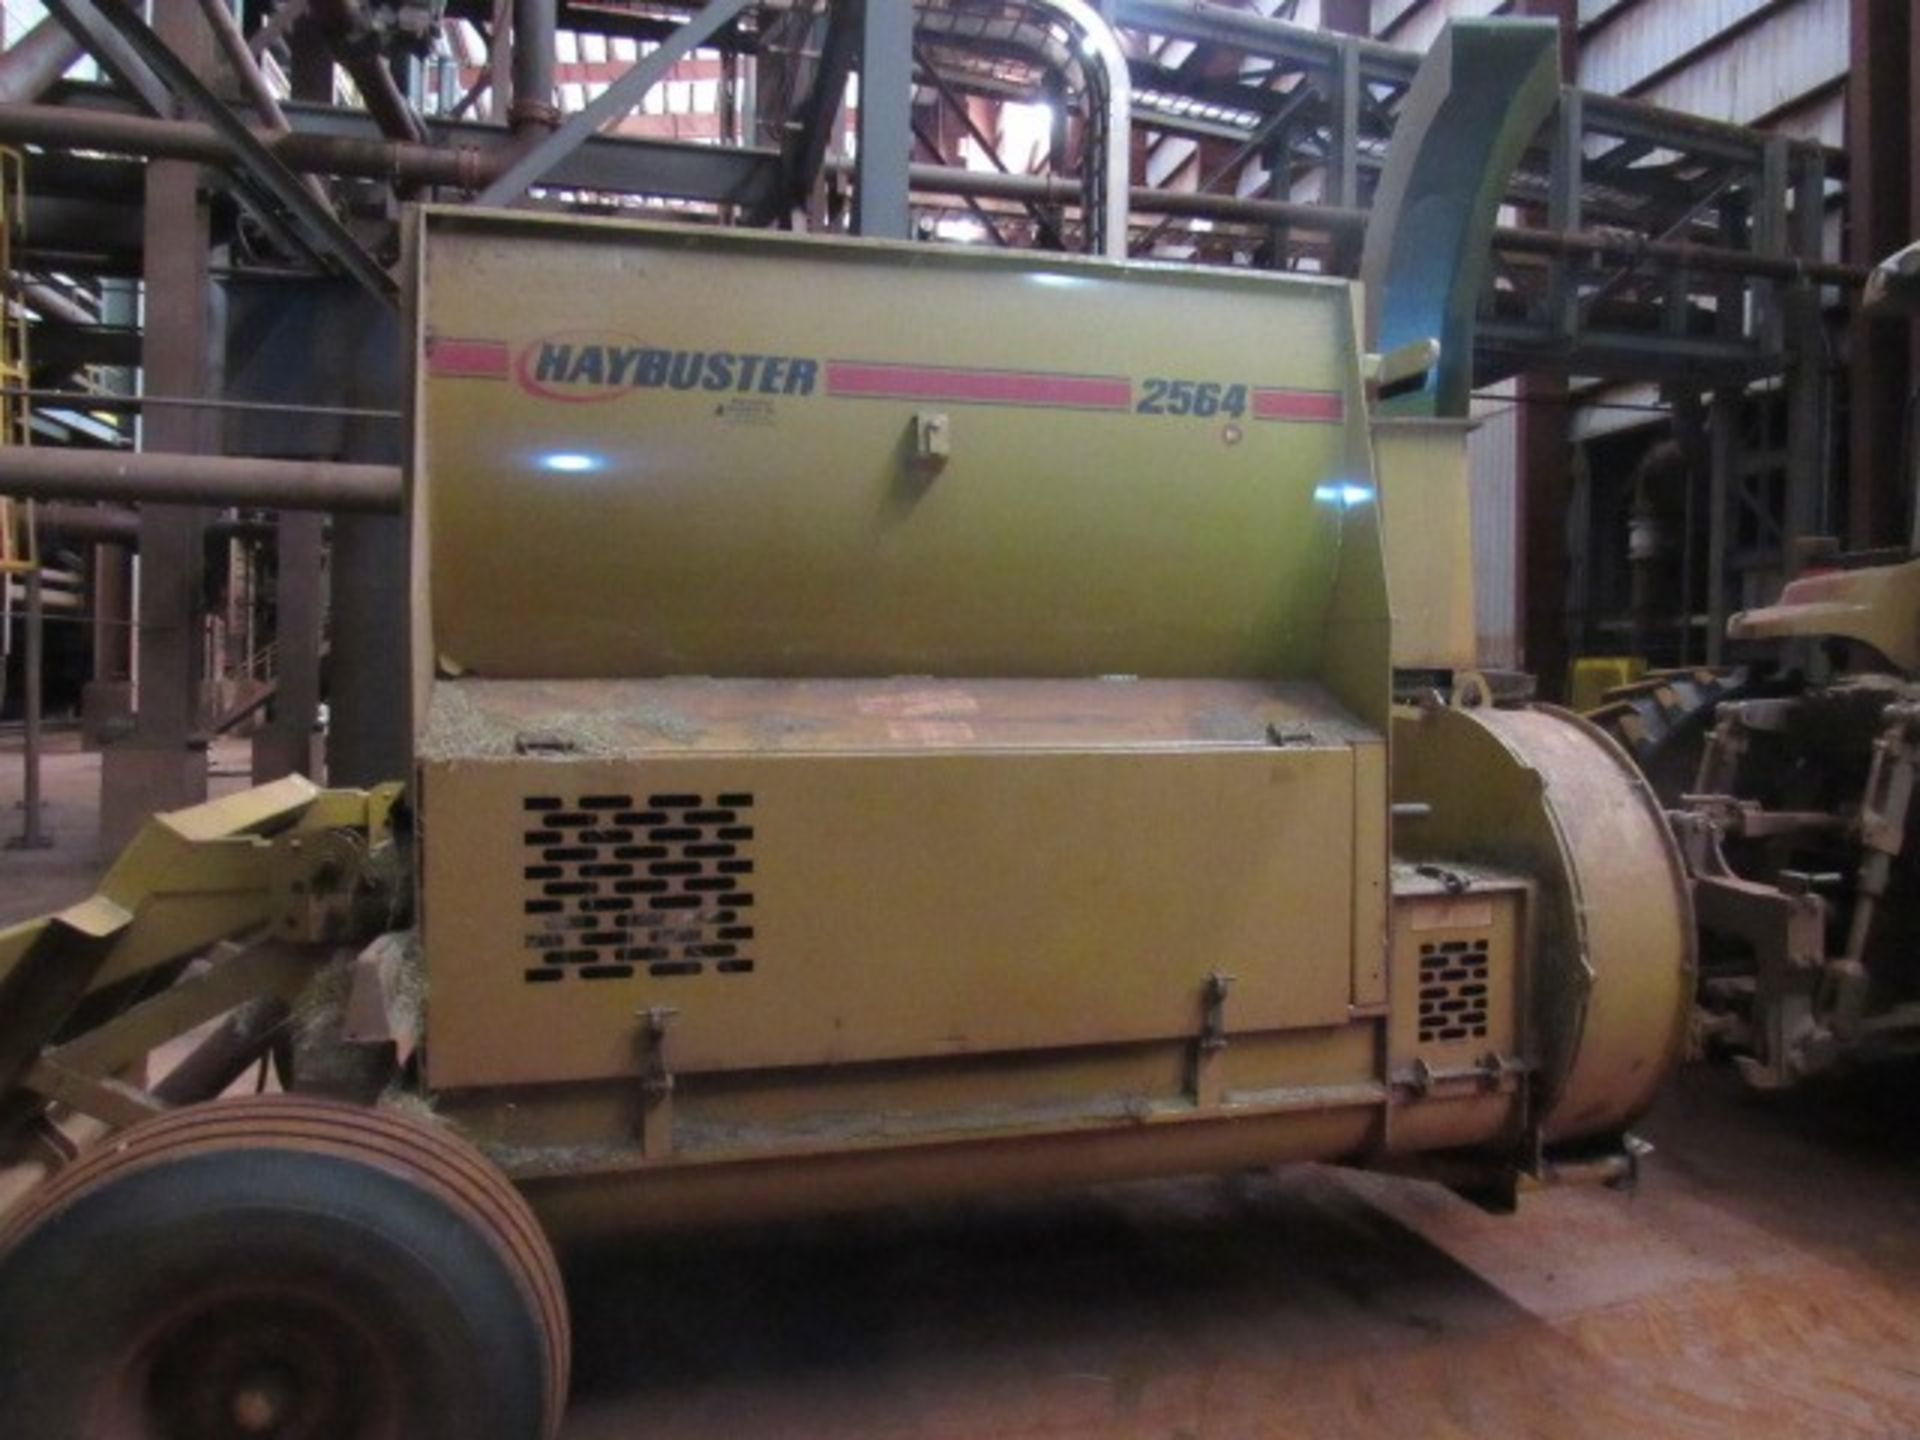 HayBuster Bale Buster, model Duratech 2564